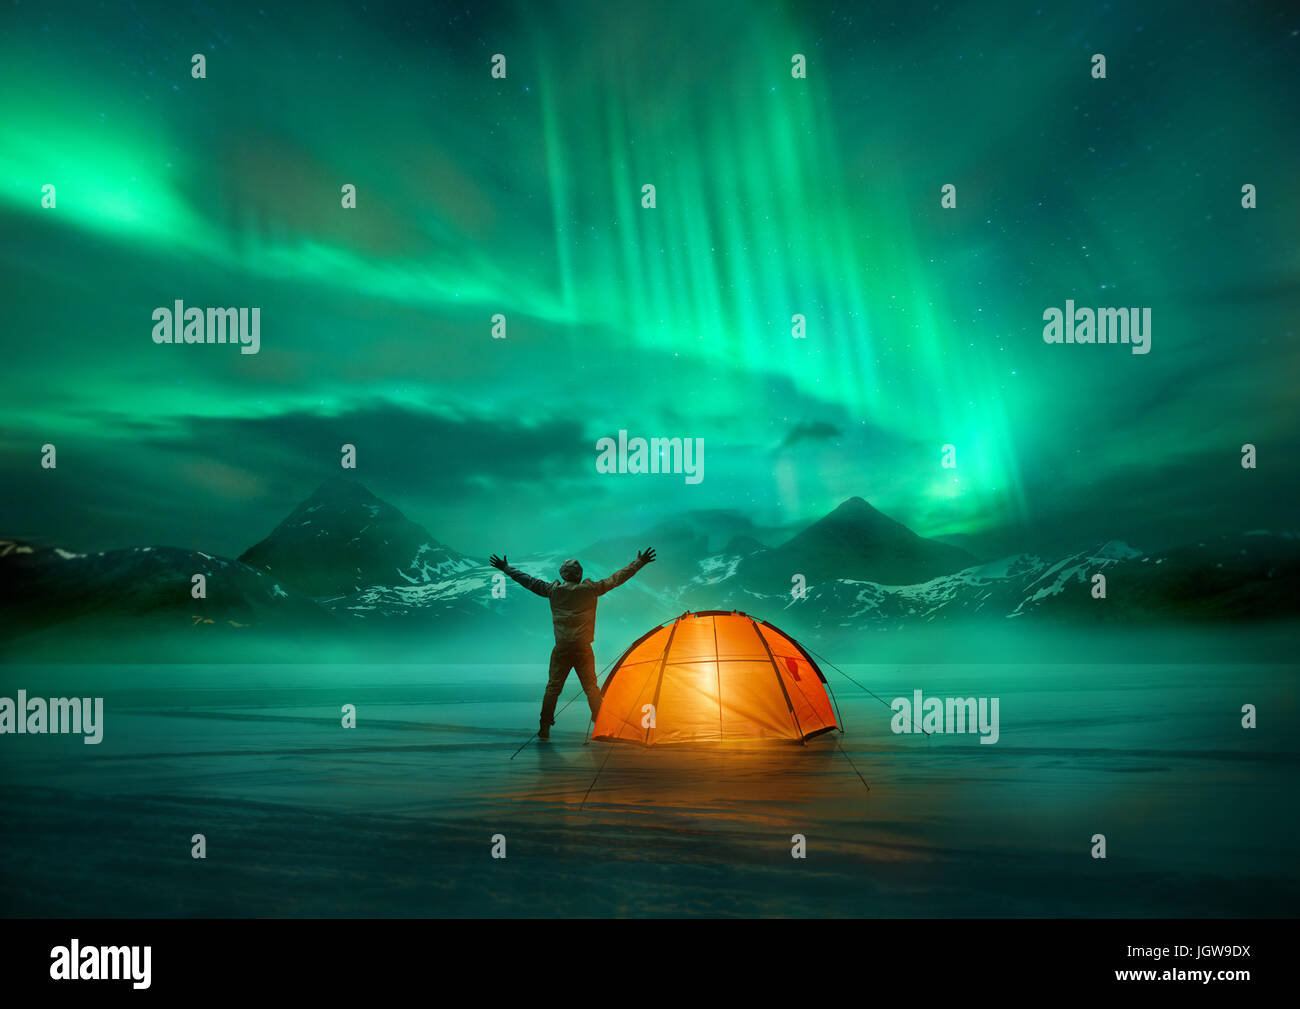 A man camping in wild northern mountains with an illuminated tent viewing a spectacular green northern lights aurora display. Photo composition. Stock Photo